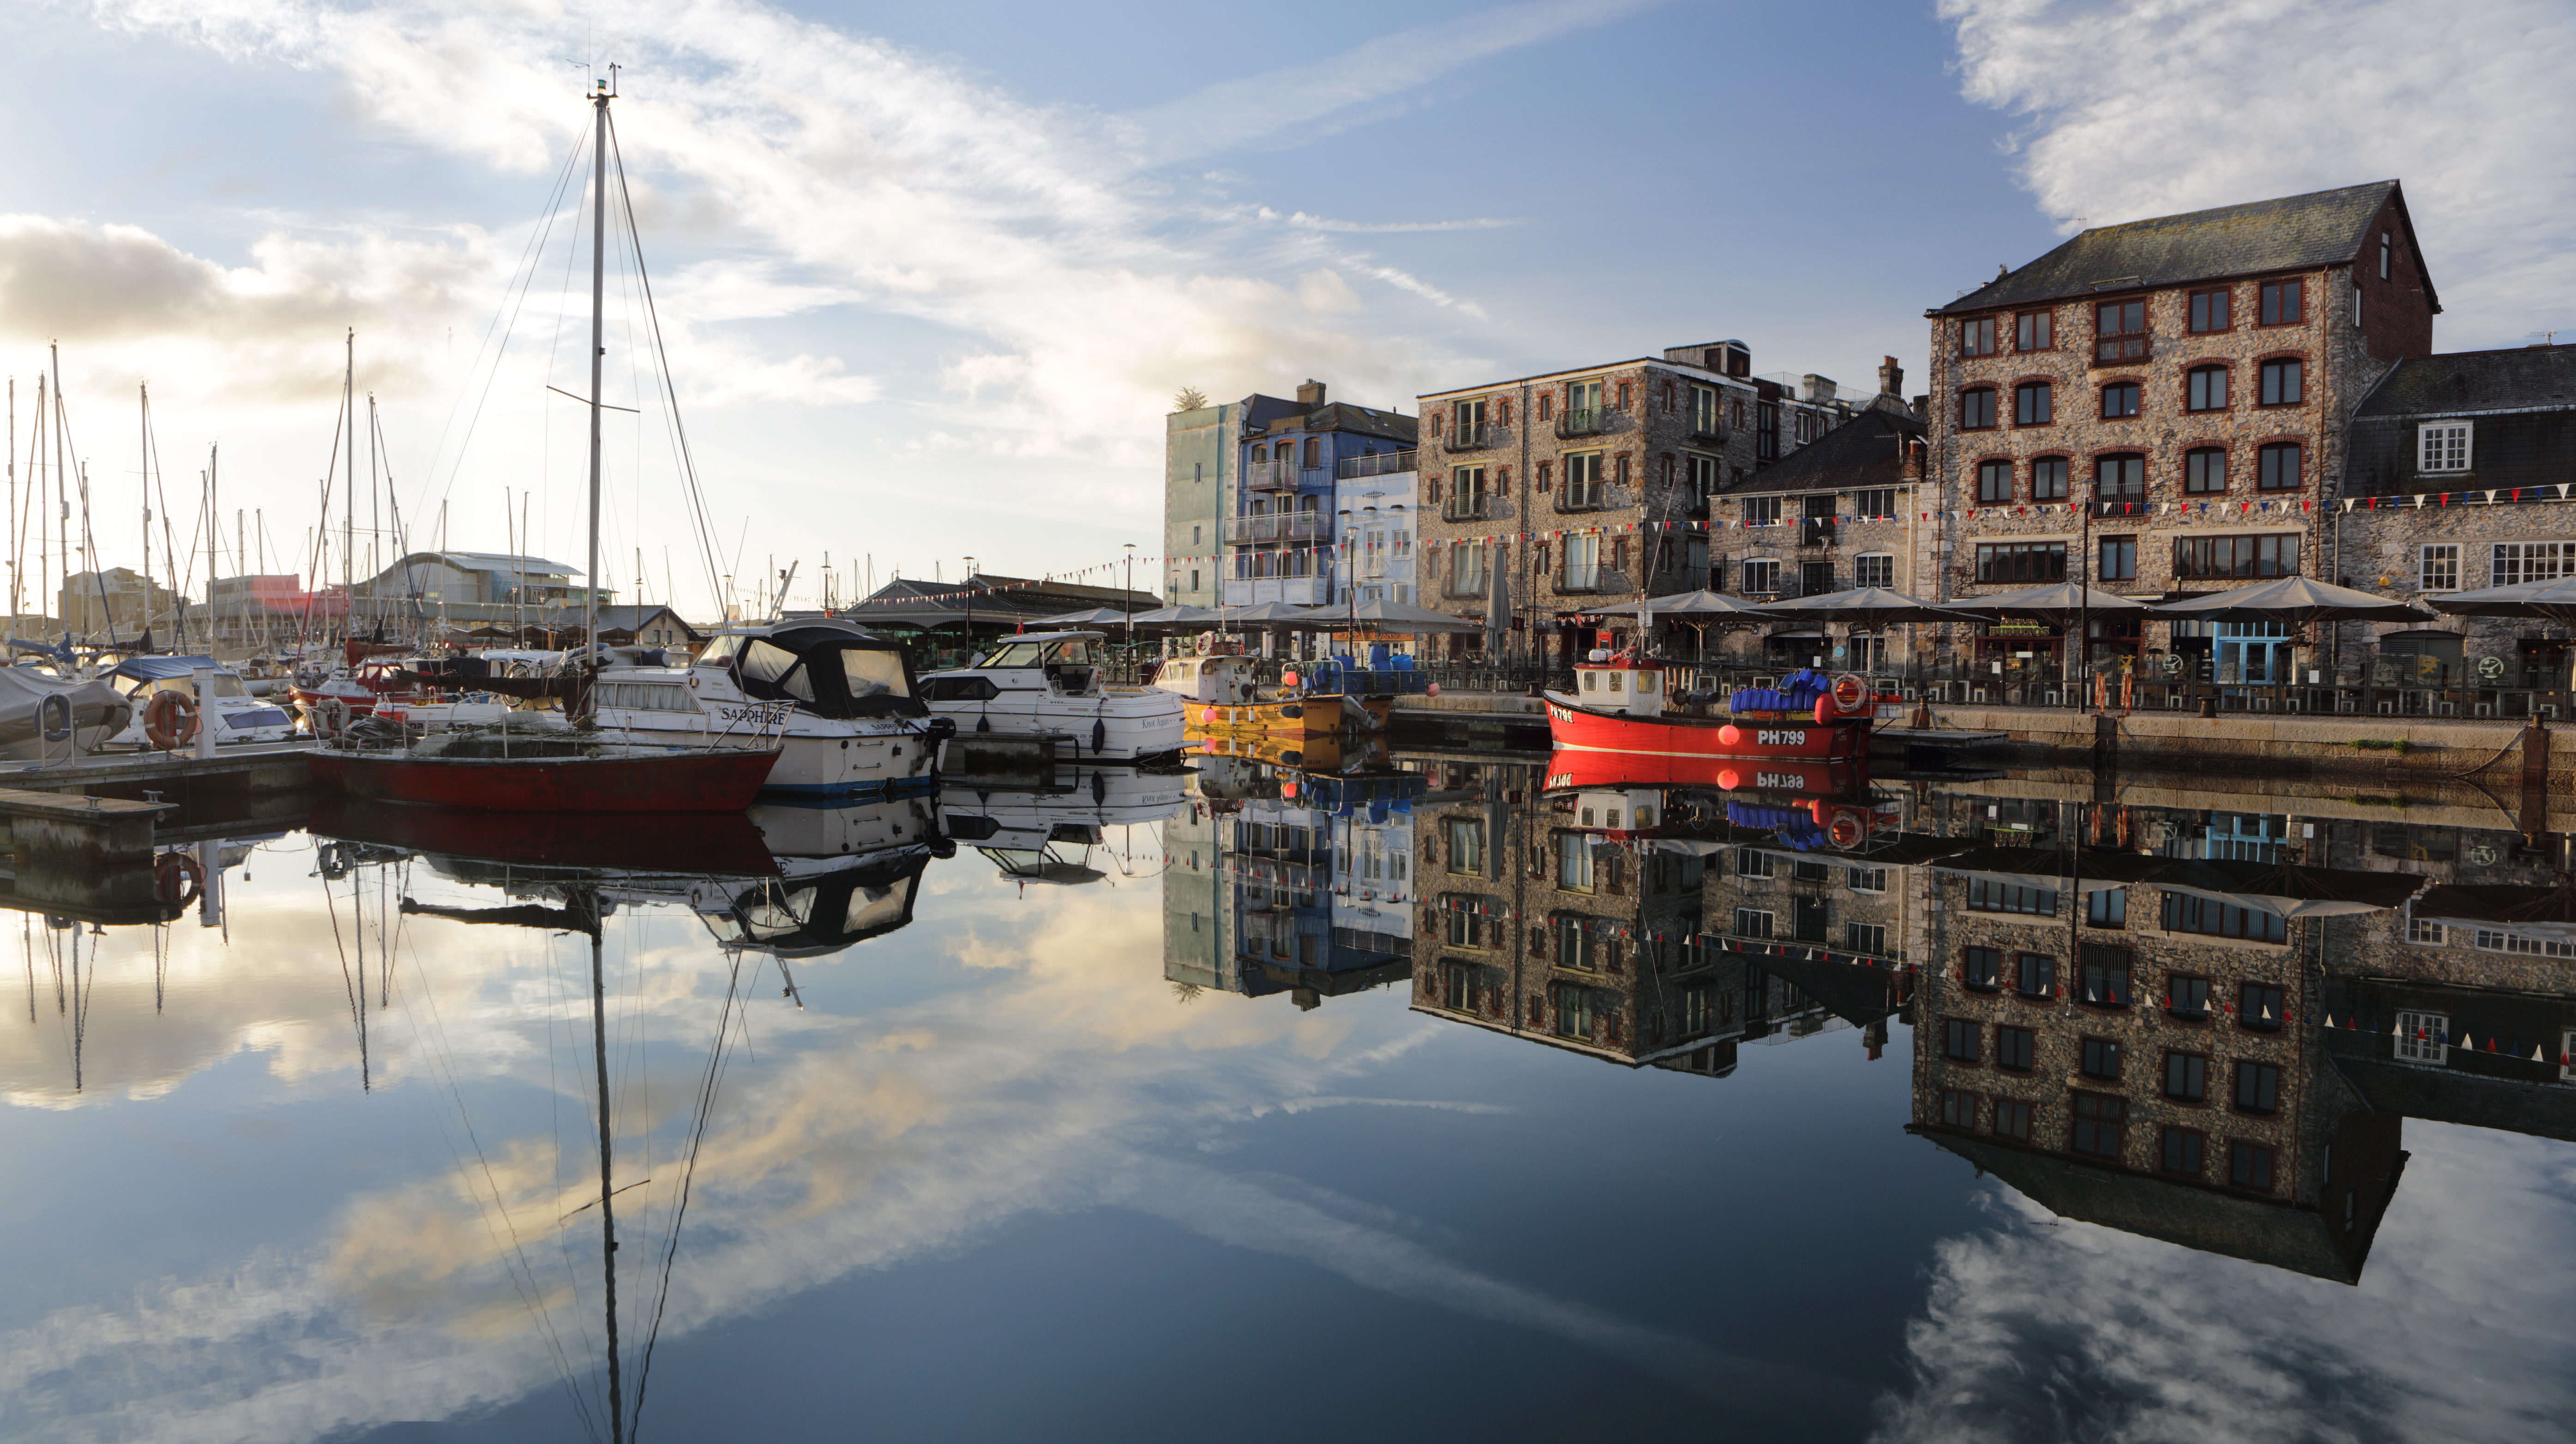 Boats and harbourside buildings reflect in serene water at The Barbican in Plymouth